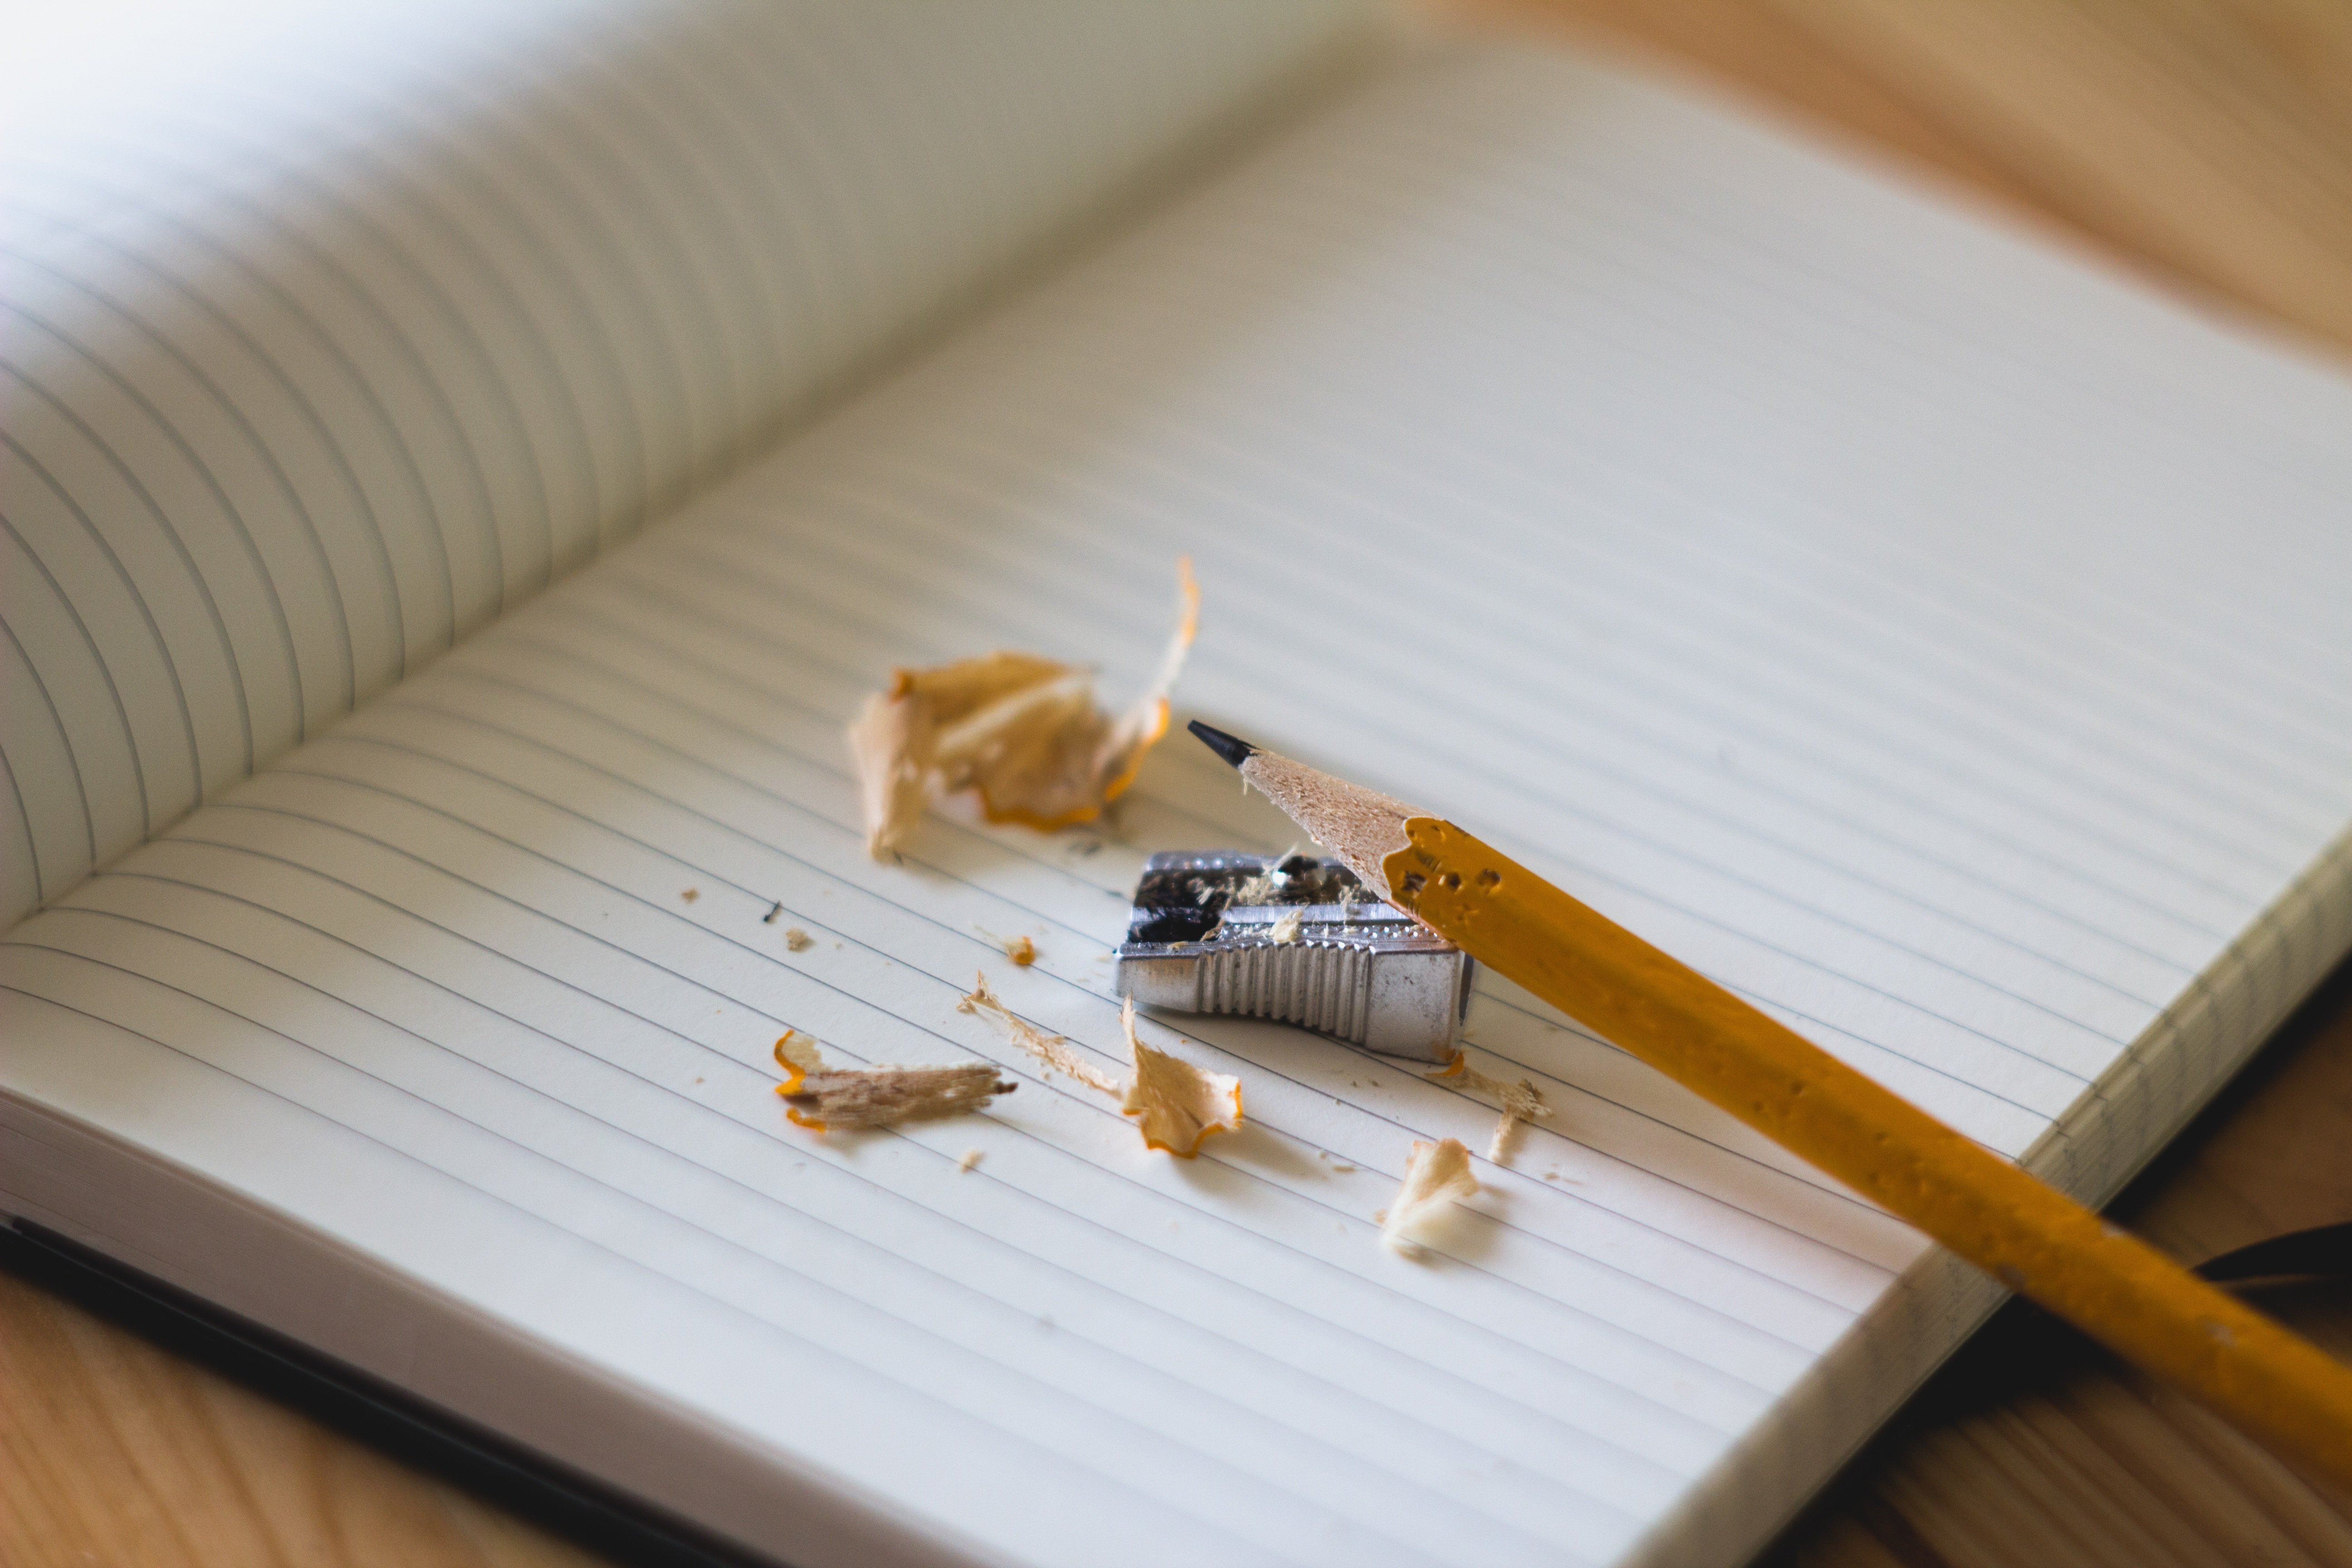 Pencil and a pencil sharpener on a notebook